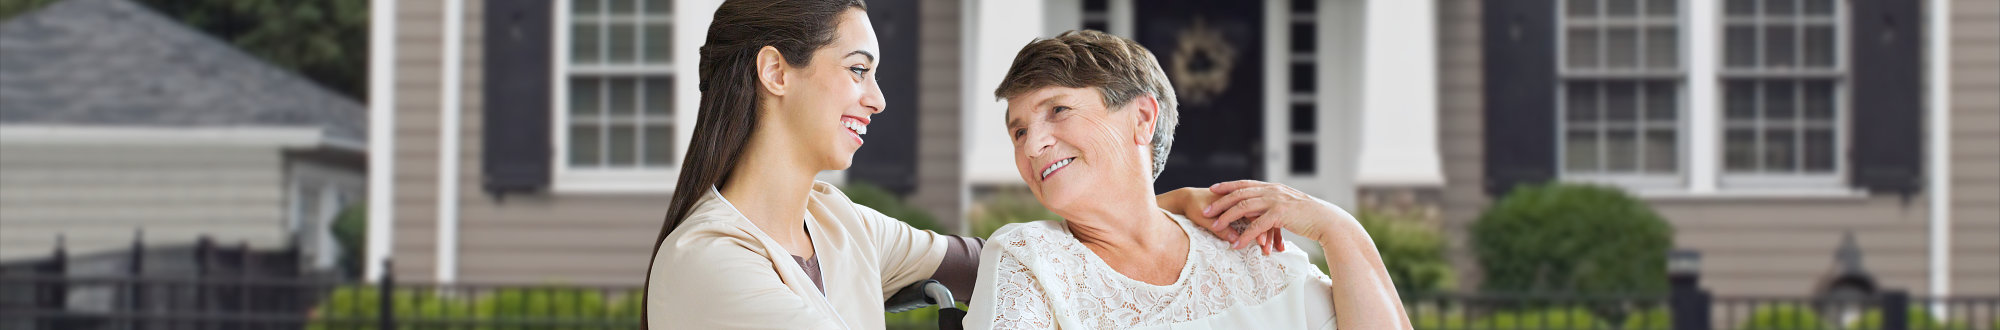 caregiver and elder woman smiling to each other